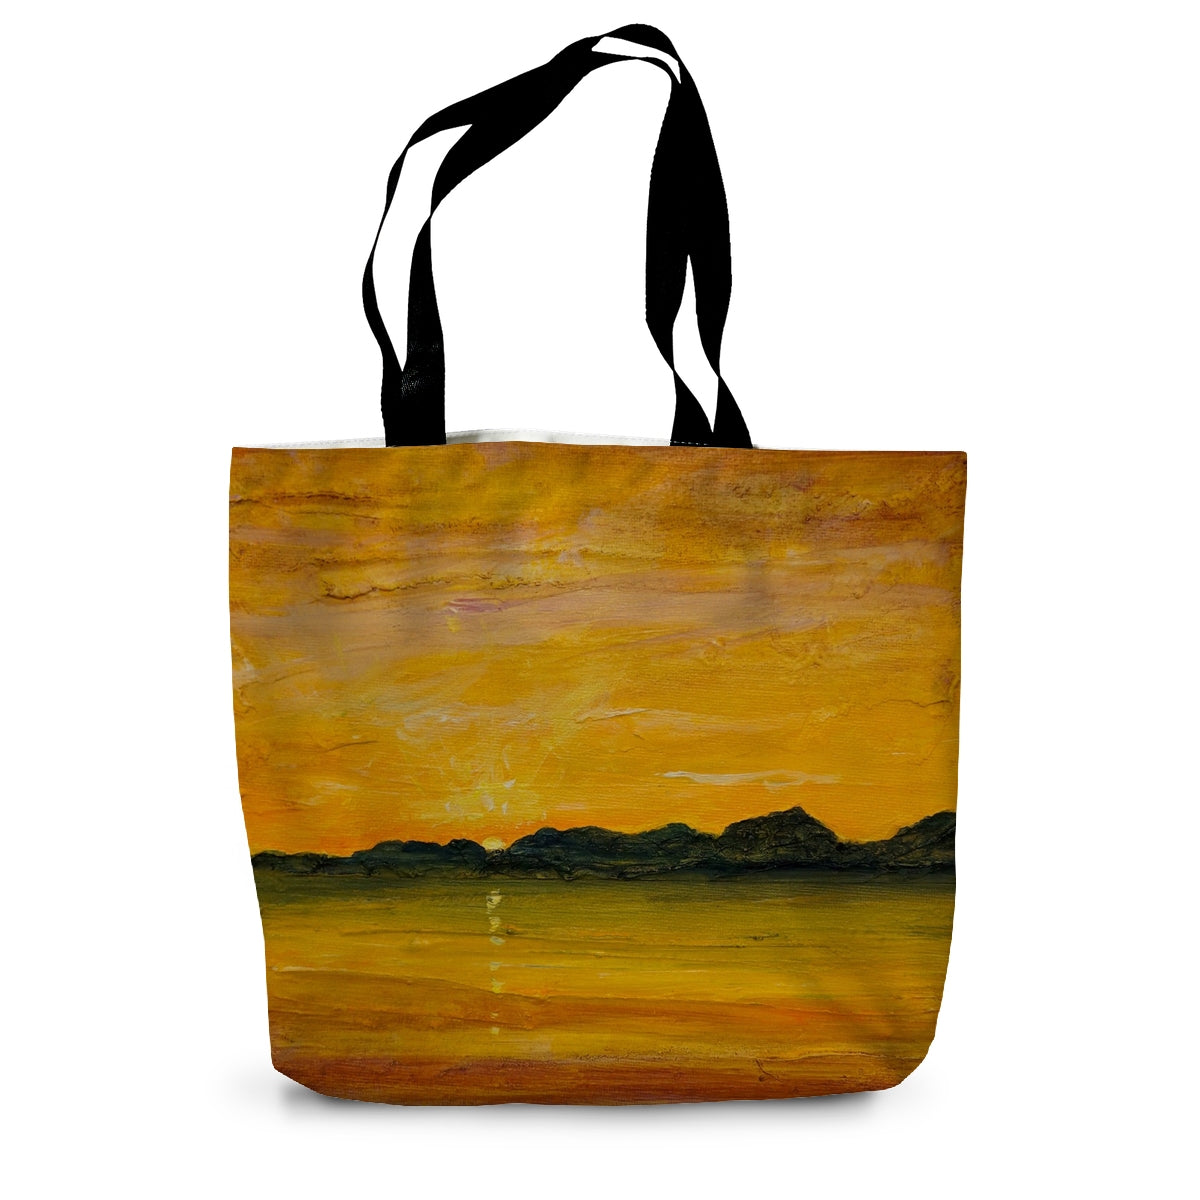 Jura Sunset Art Gifts Canvas Tote Bag-Bags-Hebridean Islands Art Gallery-14"x18.5"-Paintings, Prints, Homeware, Art Gifts From Scotland By Scottish Artist Kevin Hunter